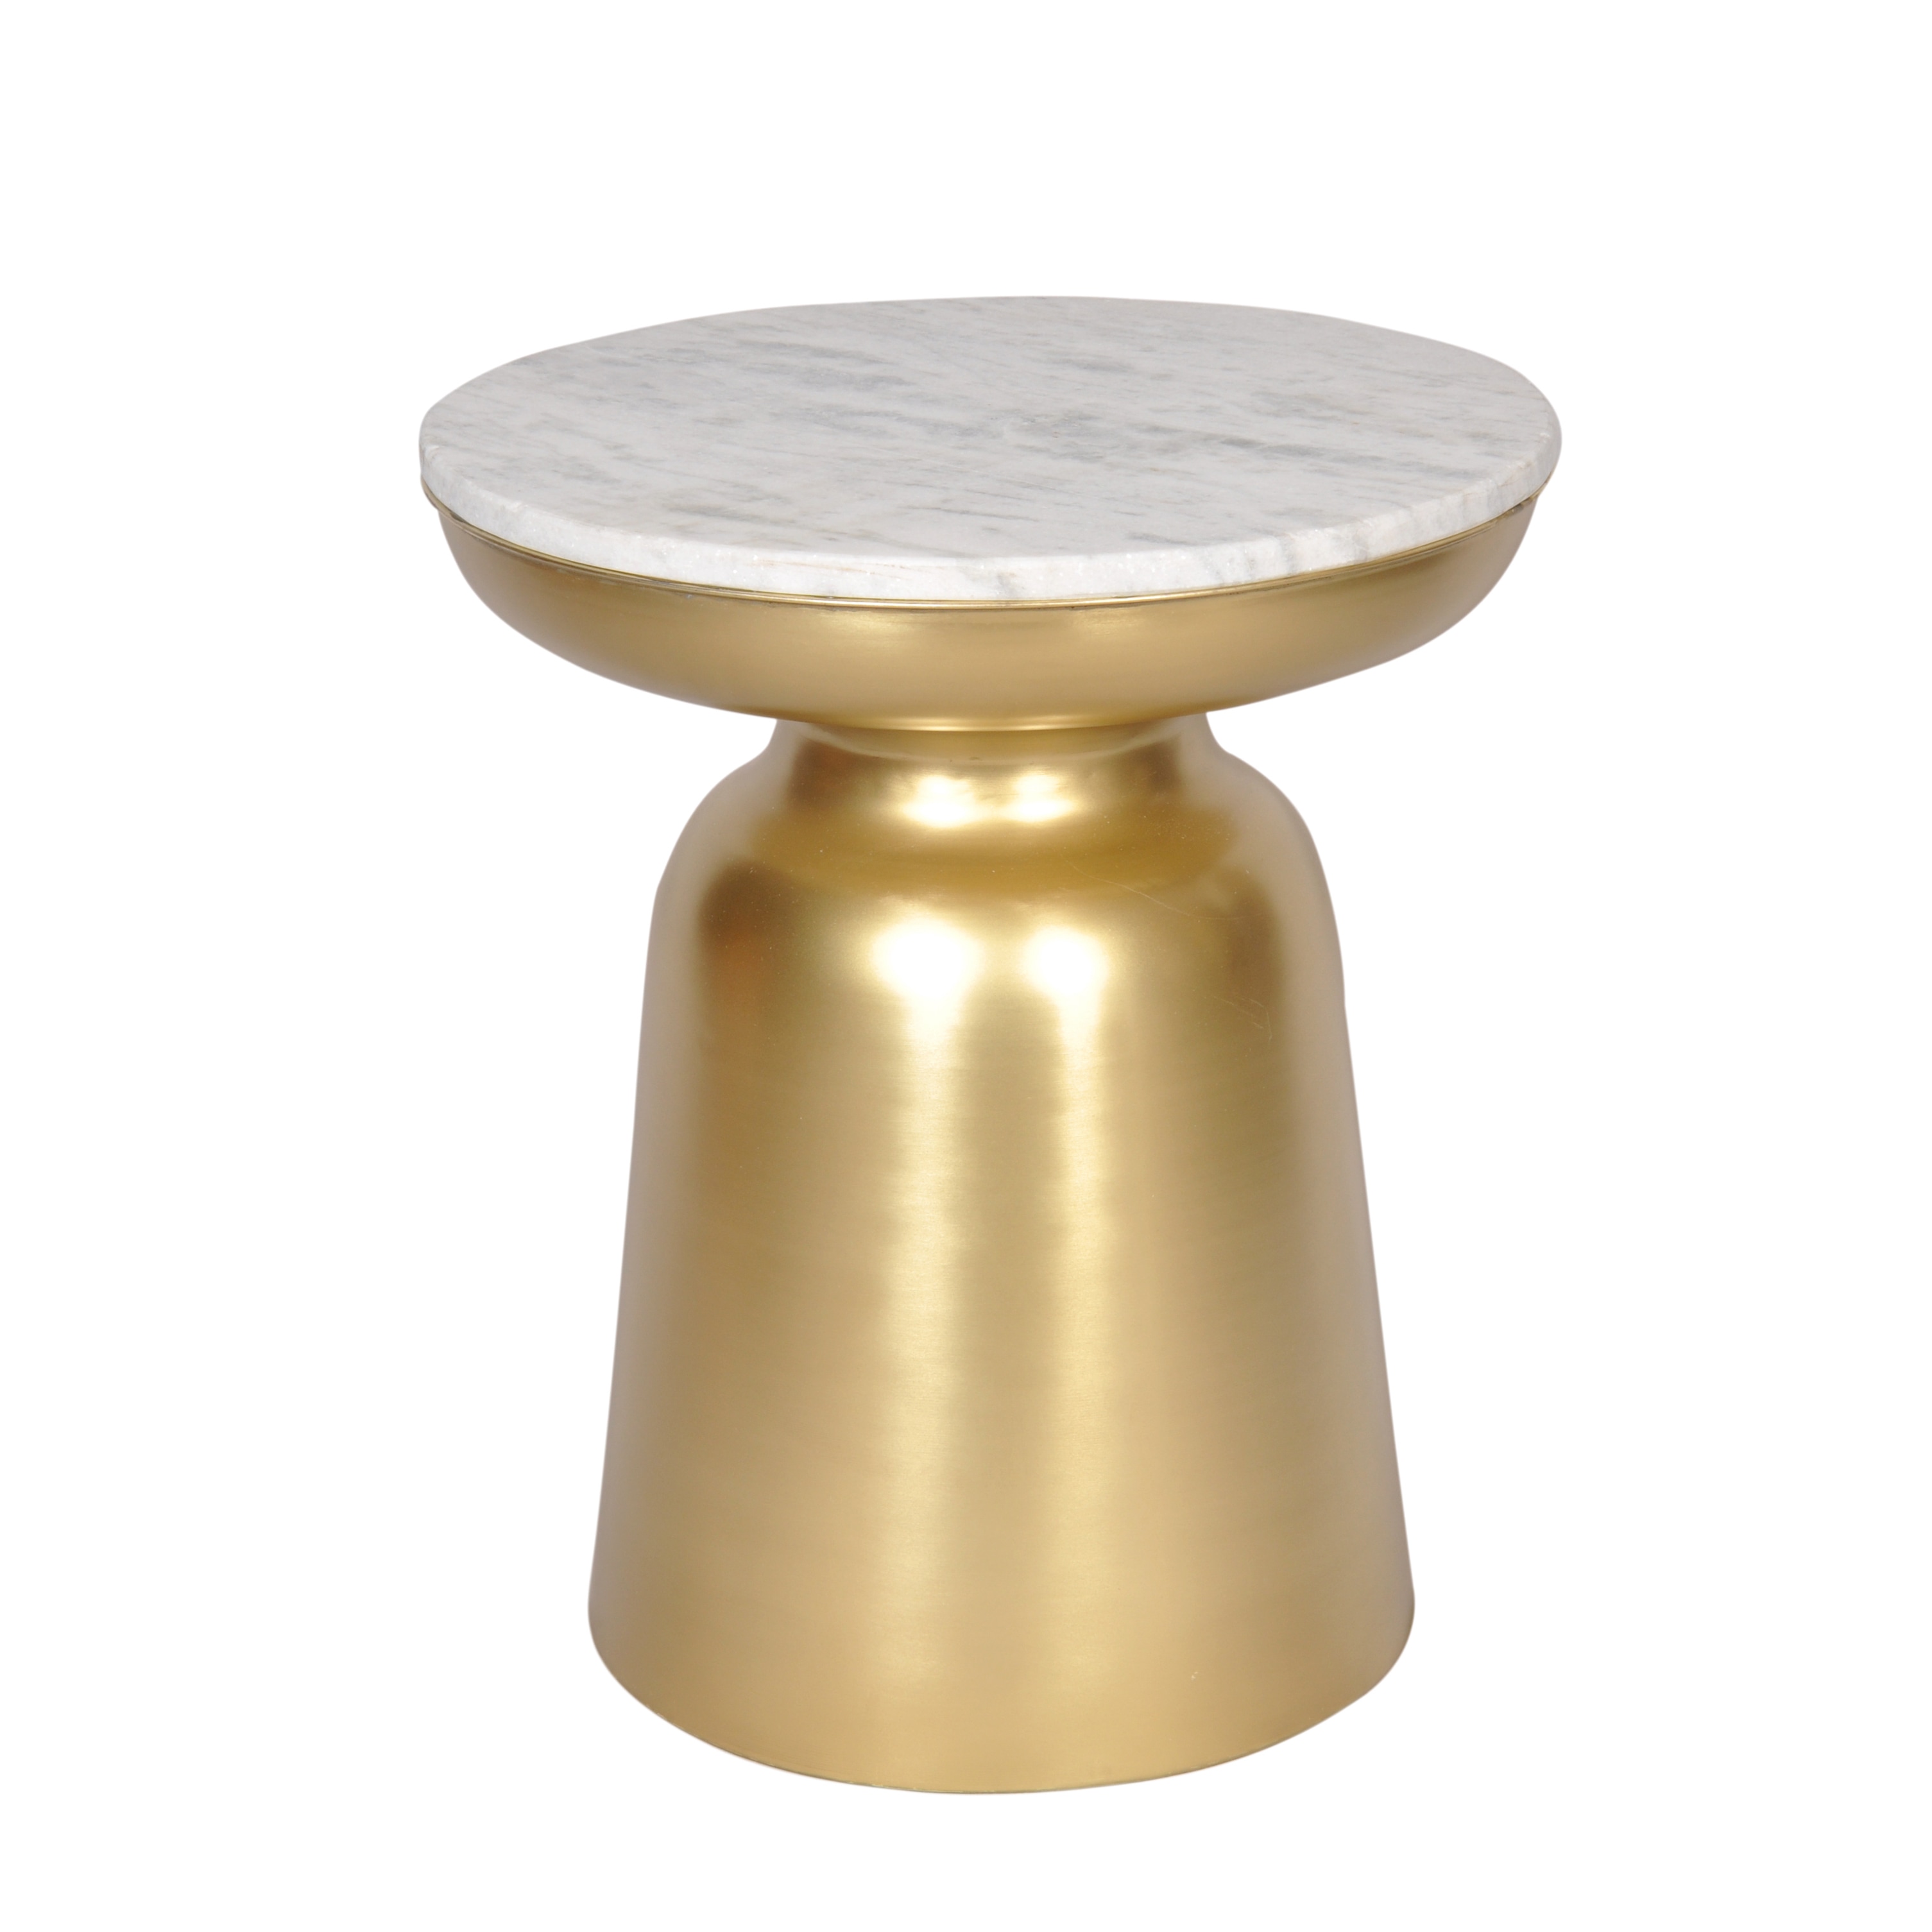 contemporary luxe brass mable top accent table free shipping today gold end inch round tablecloth navy blue peva mission plans the pier furniture black tables with storage